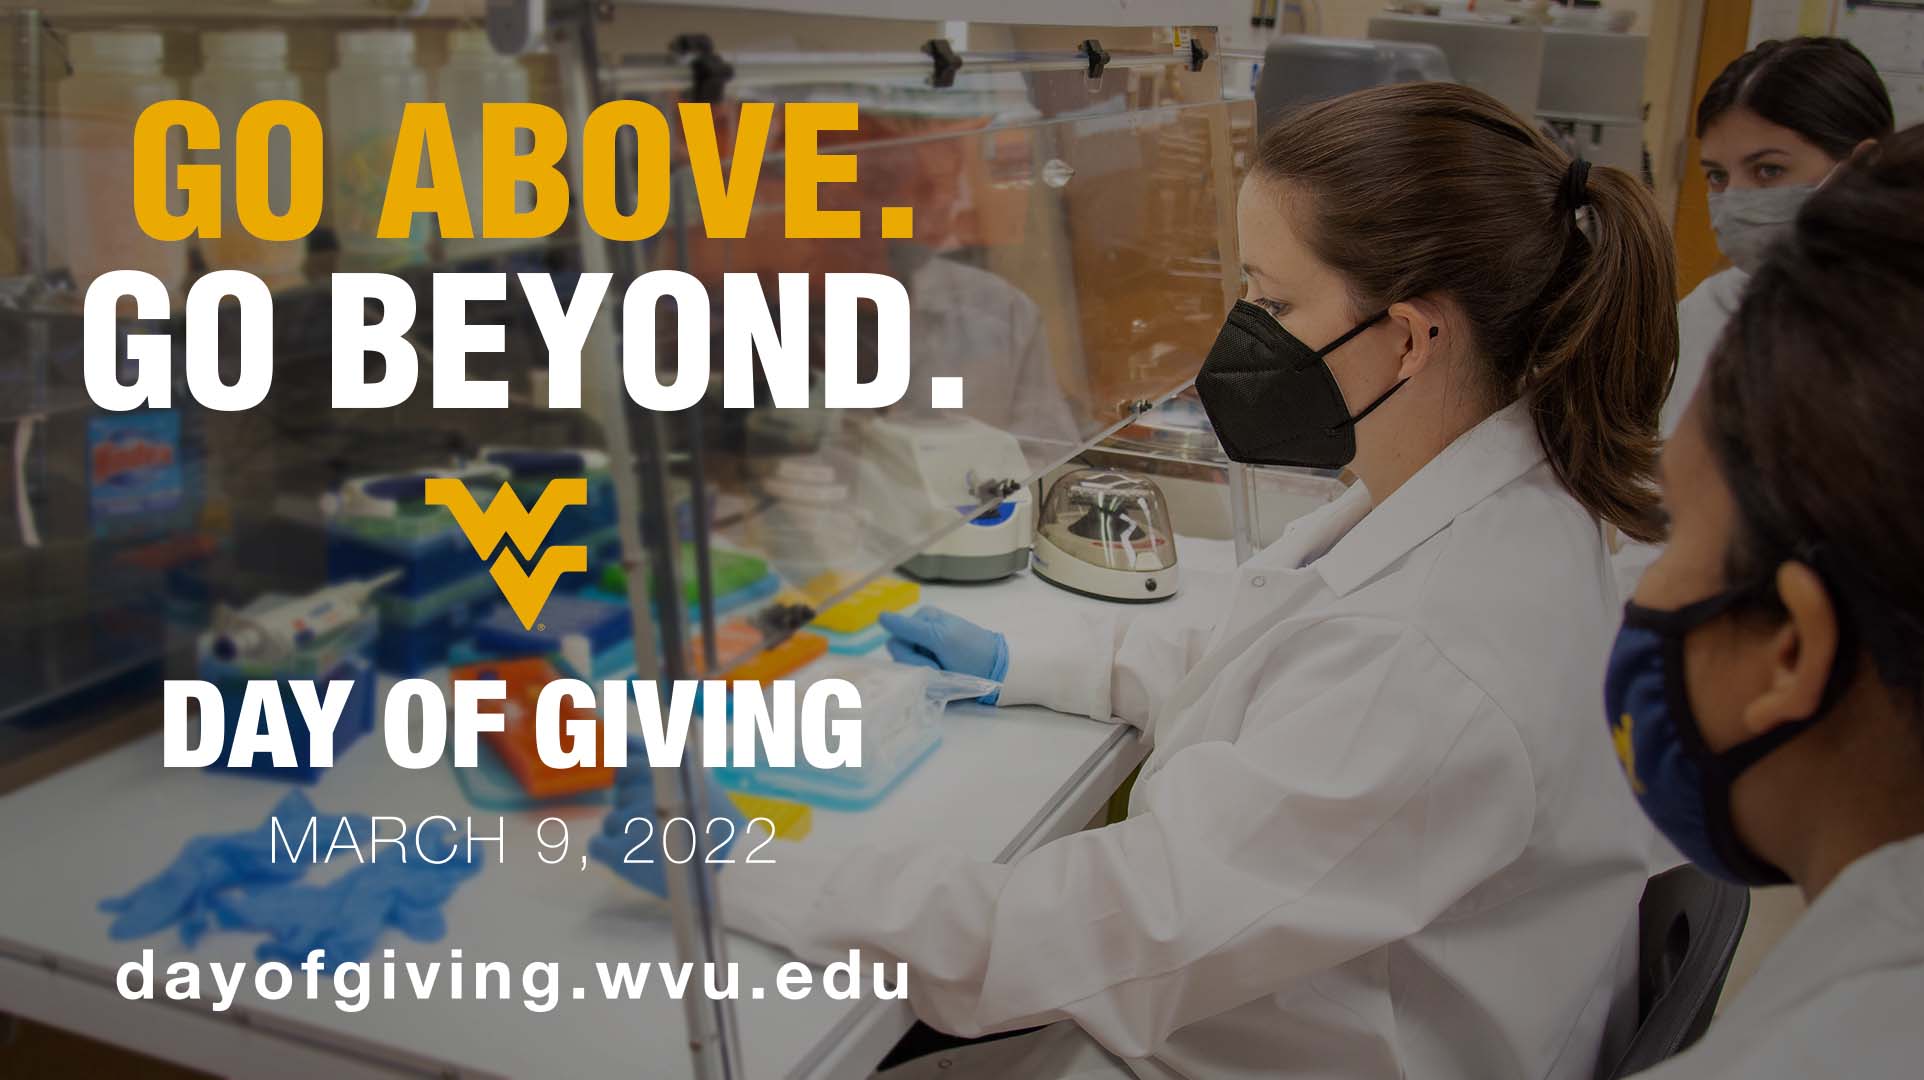 Go above. Go Beyond. WVU Day of Giving, March 9, 2022 - dayofgiving.wvu.edu